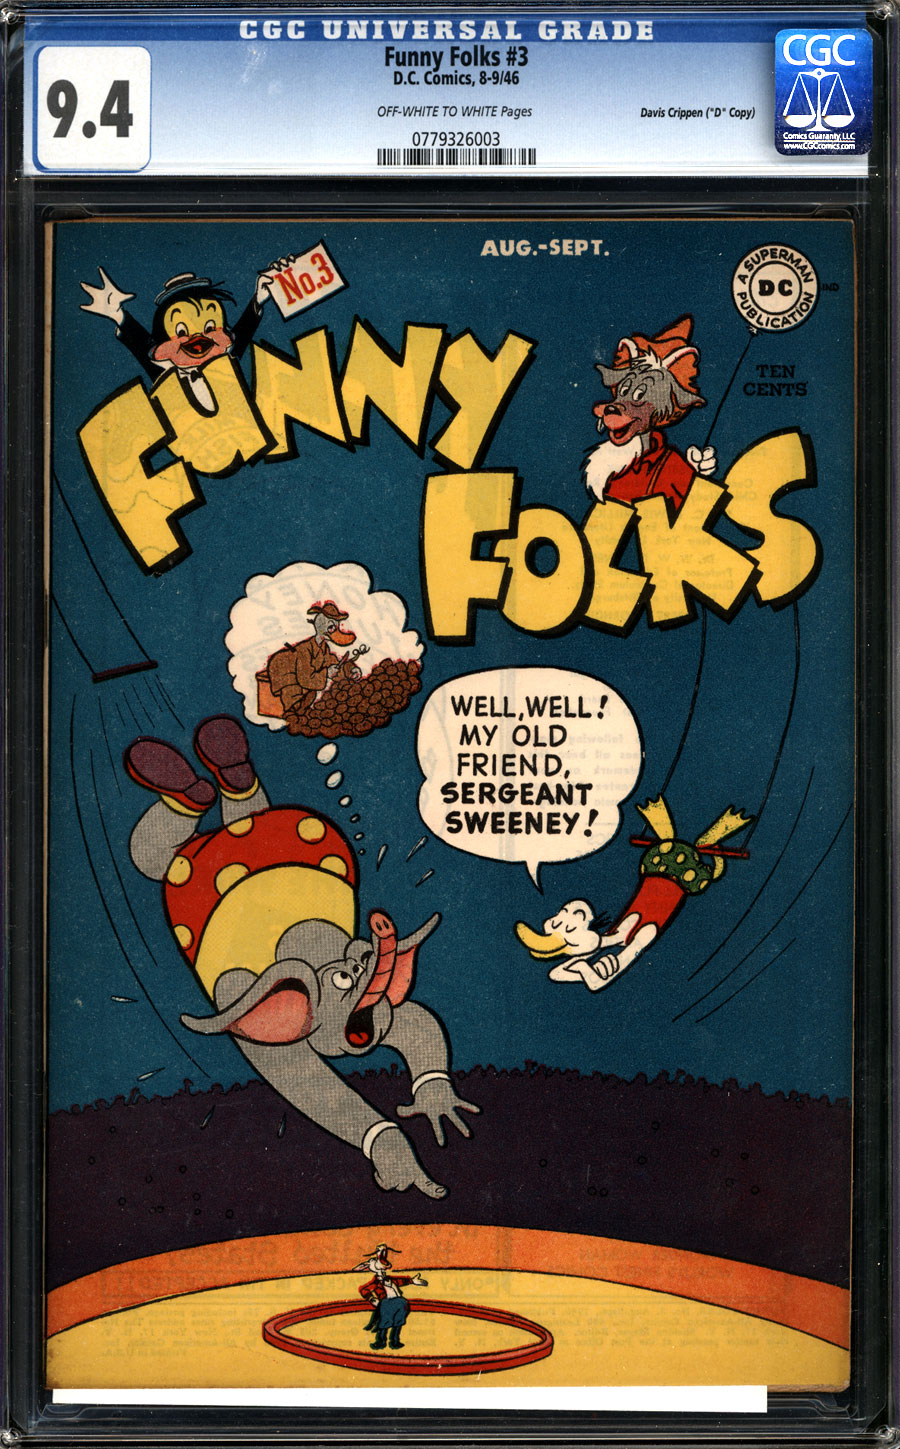 All the Funny Folks by Jack Lait